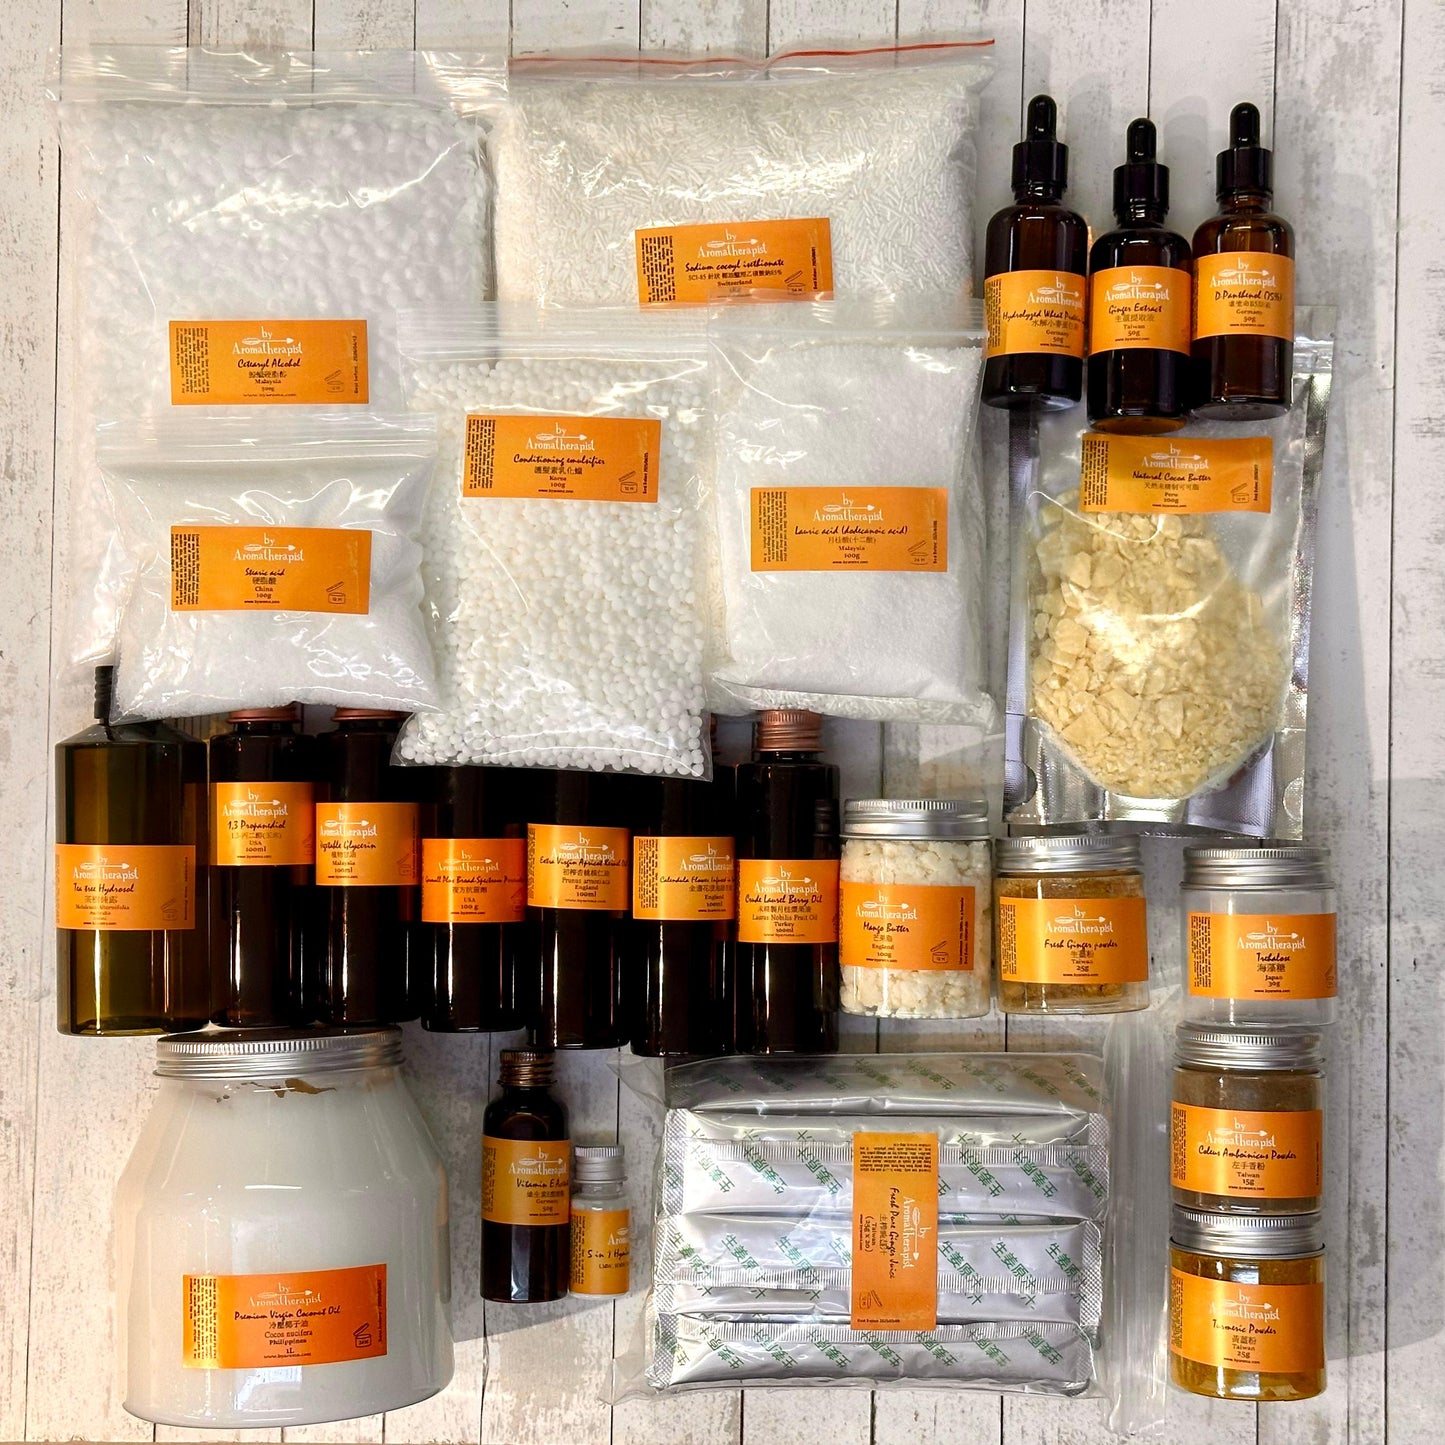 Natural Hair Care Products
Certificate Course Ingredients Package (Include Essential Oils)
天然頭髮護理產品導師證書課程材料套裝（連精油）